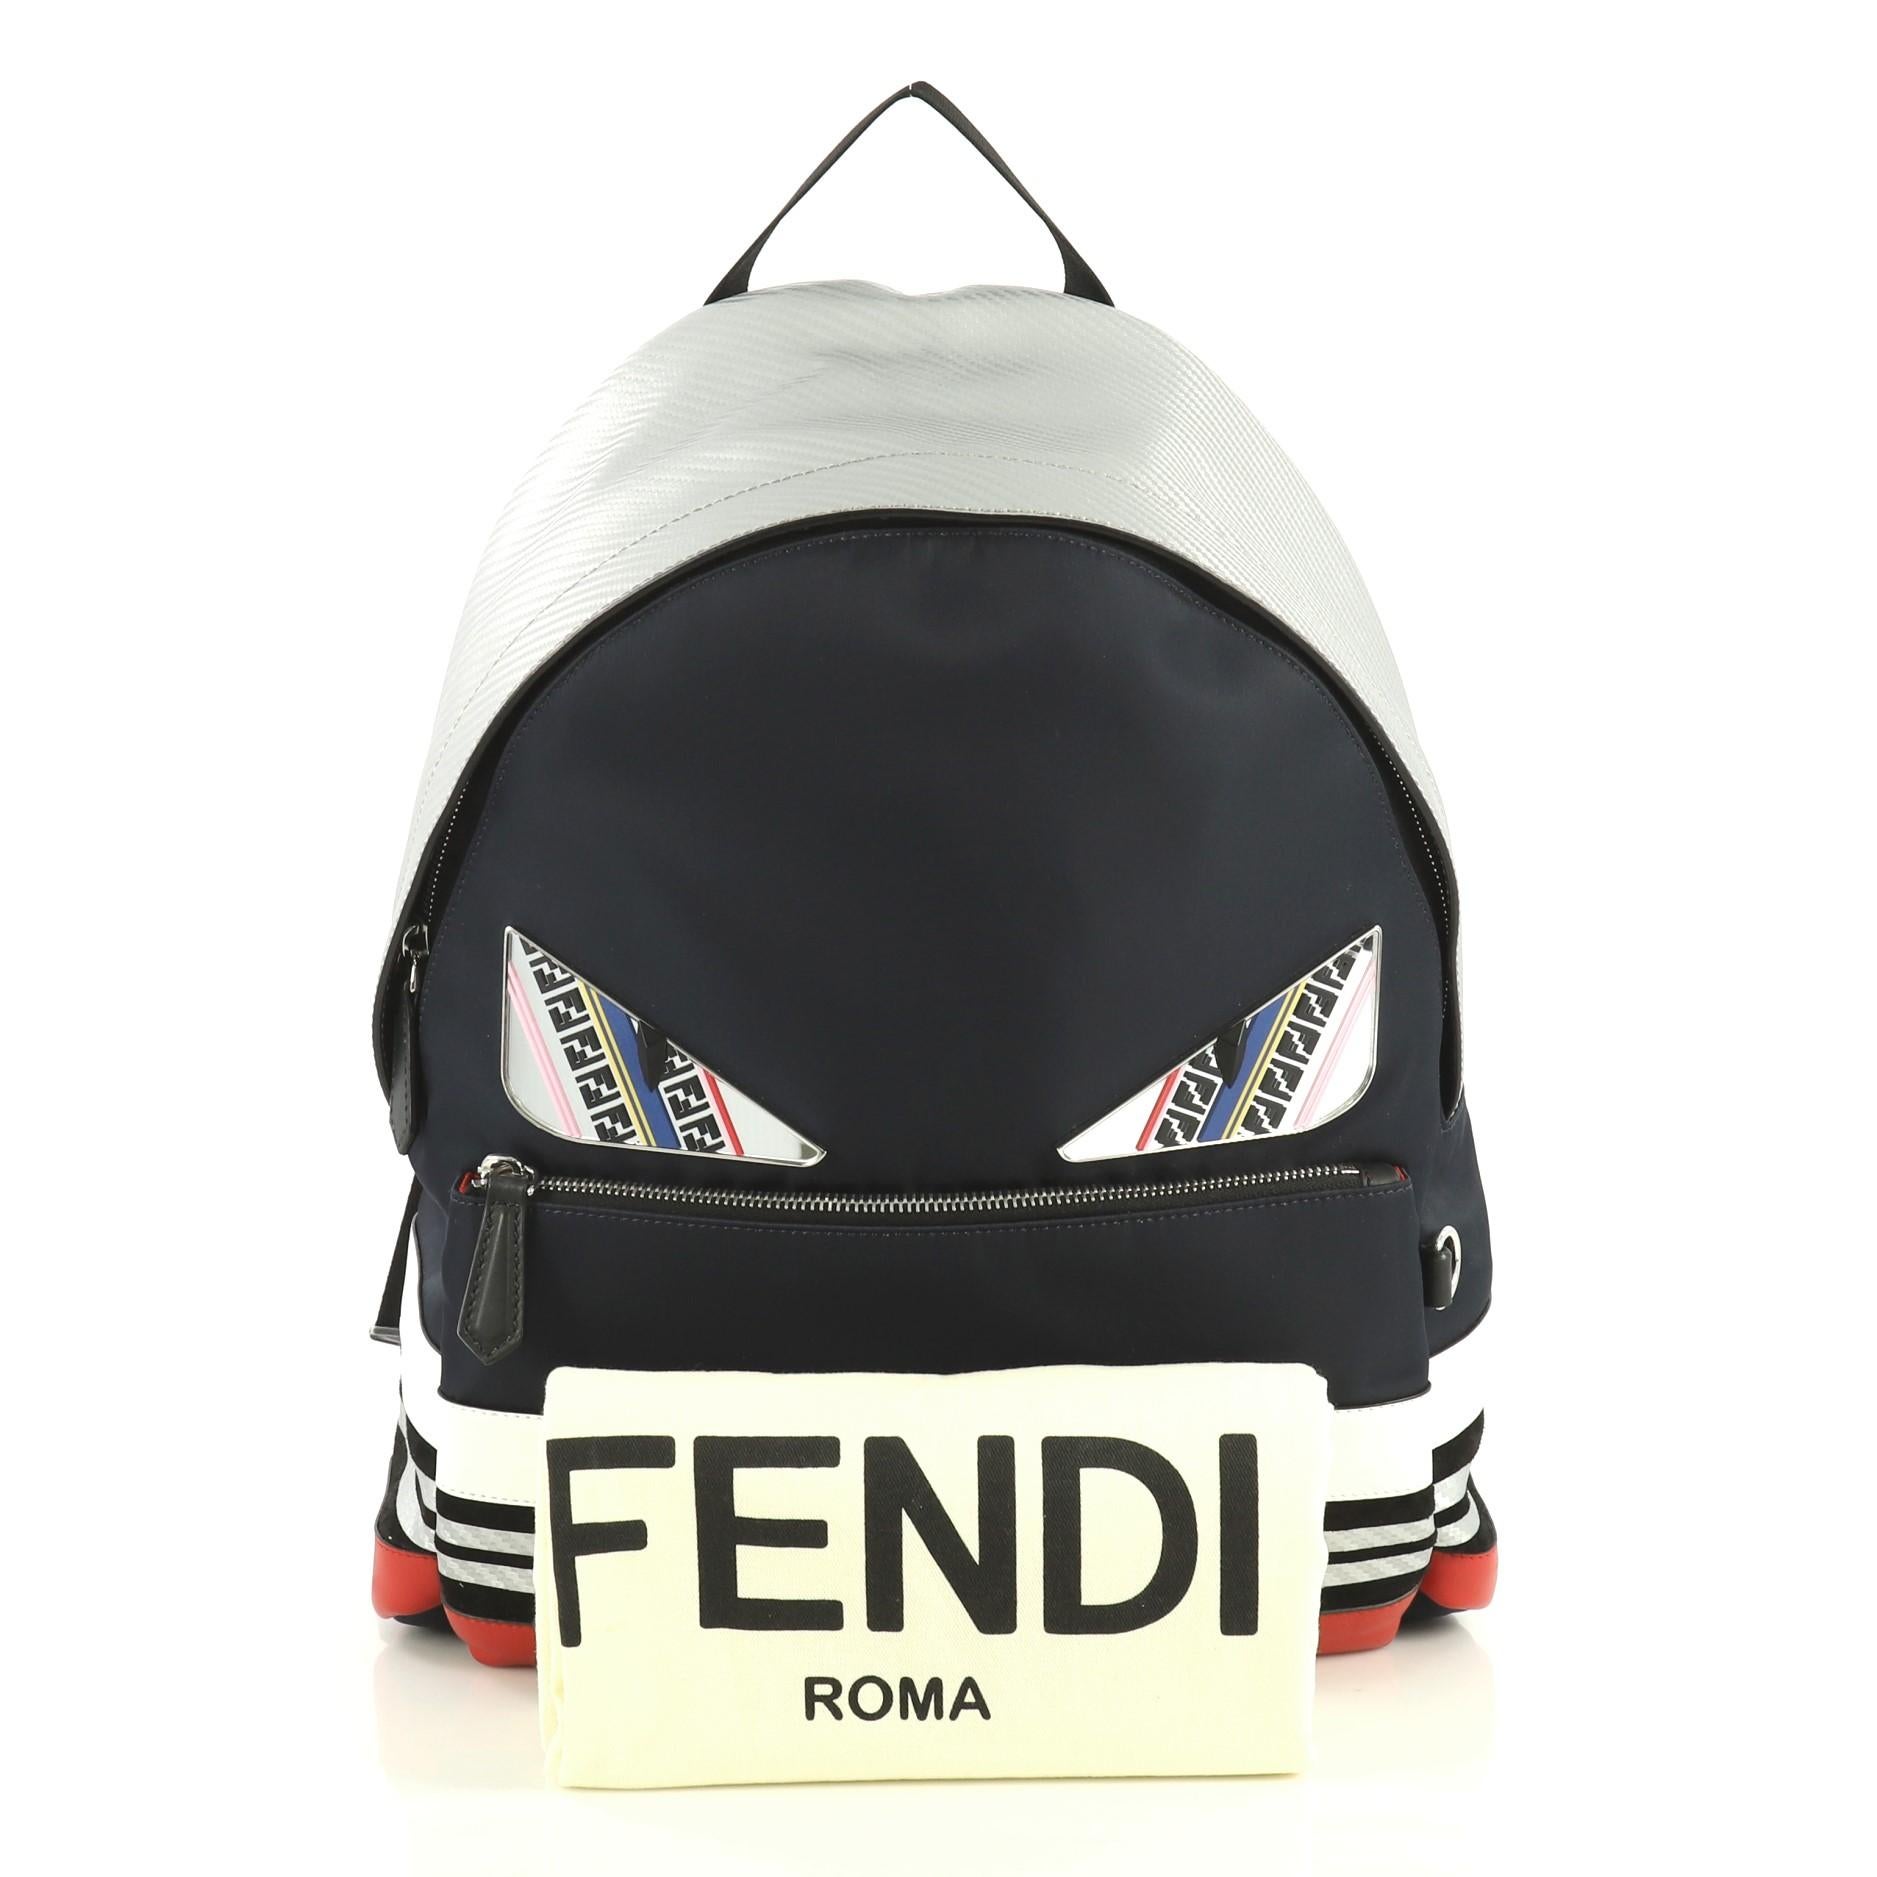 This Fendi Monster Backpack Nylon with Leather Large, crafted from blue nylon and multicolor leather, features adjustable shoulder straps, monster design, exterior front zip pocket, and silver-tone hardware. Its zip closure opens to a black nylon